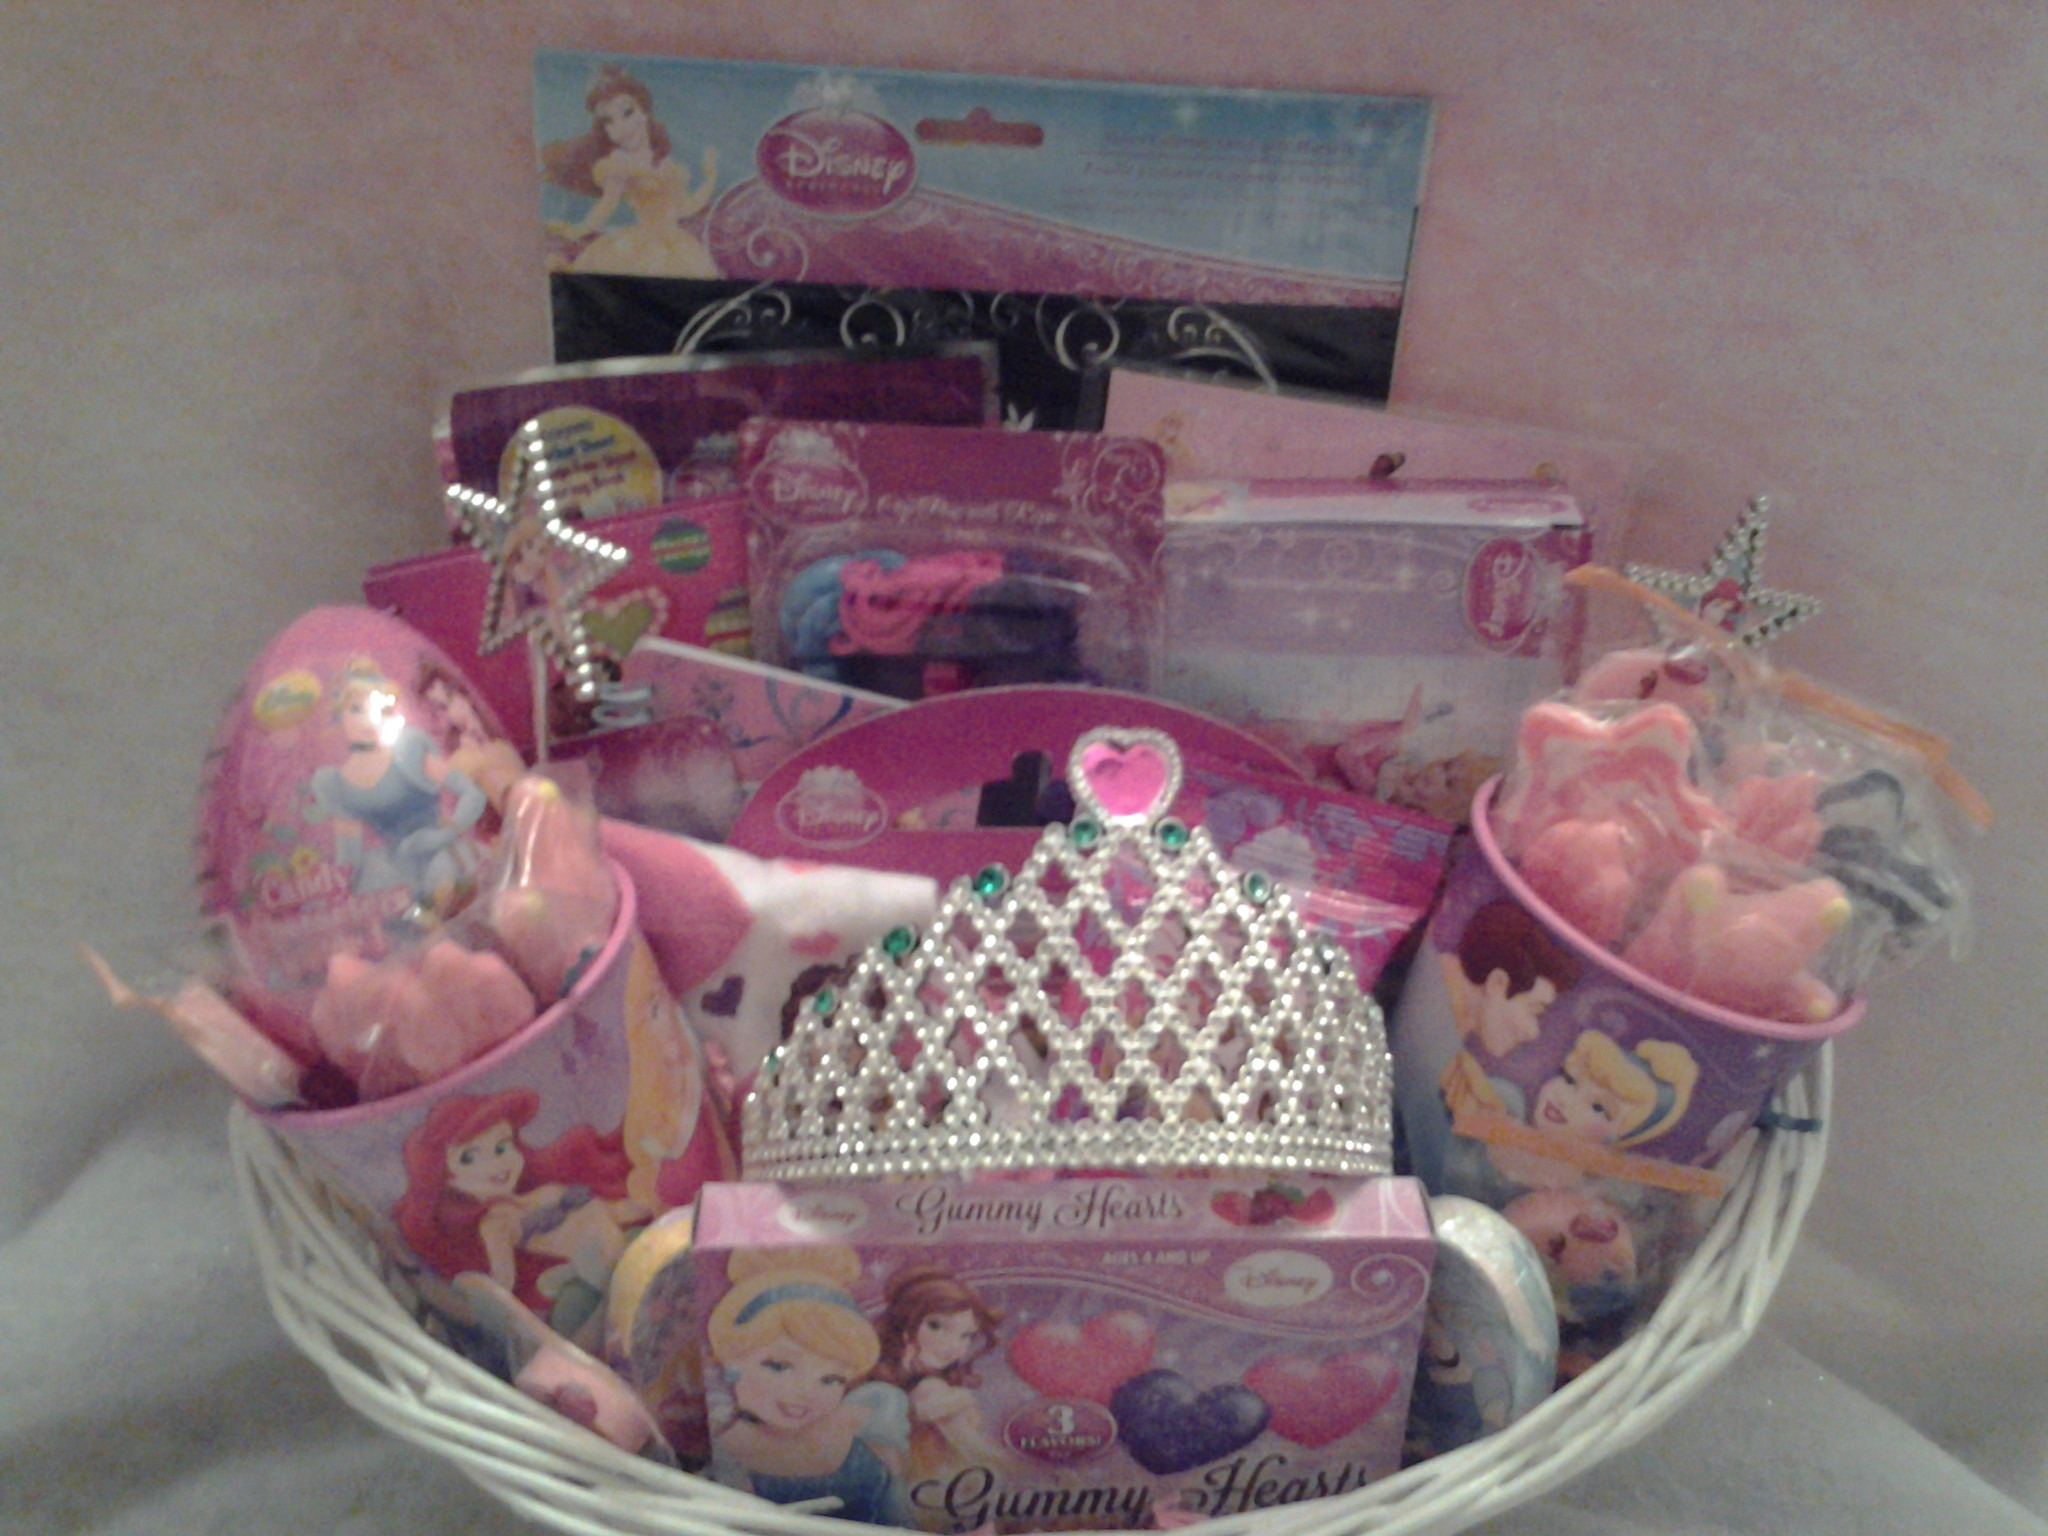 Princess Gift Basket Ideas
 Connie s Creations Princess Gift Basket